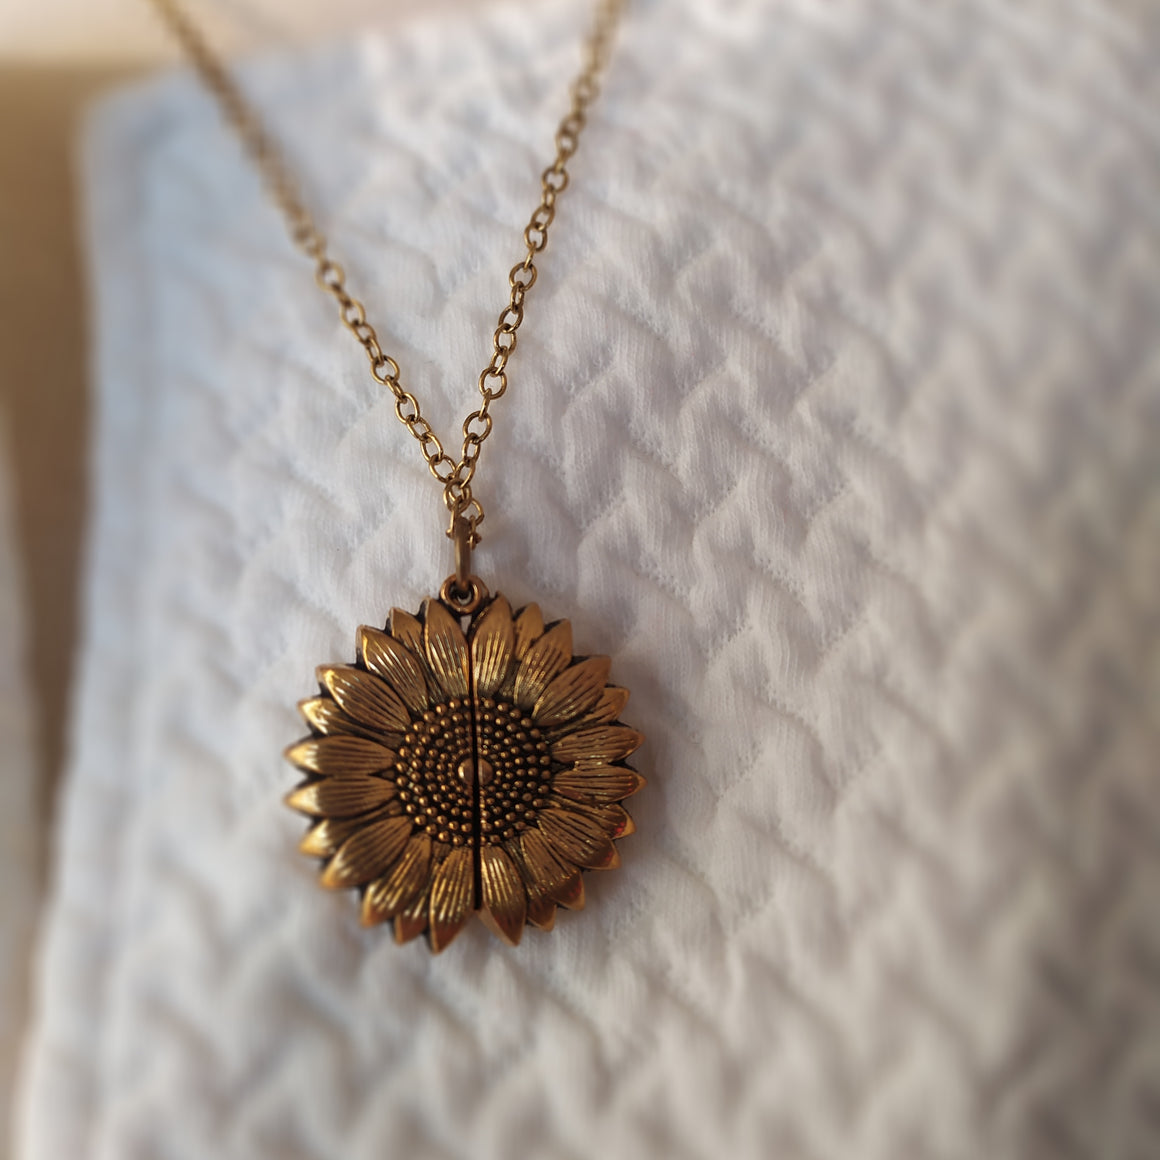 Sunflower Necklace - You are my sunshine!